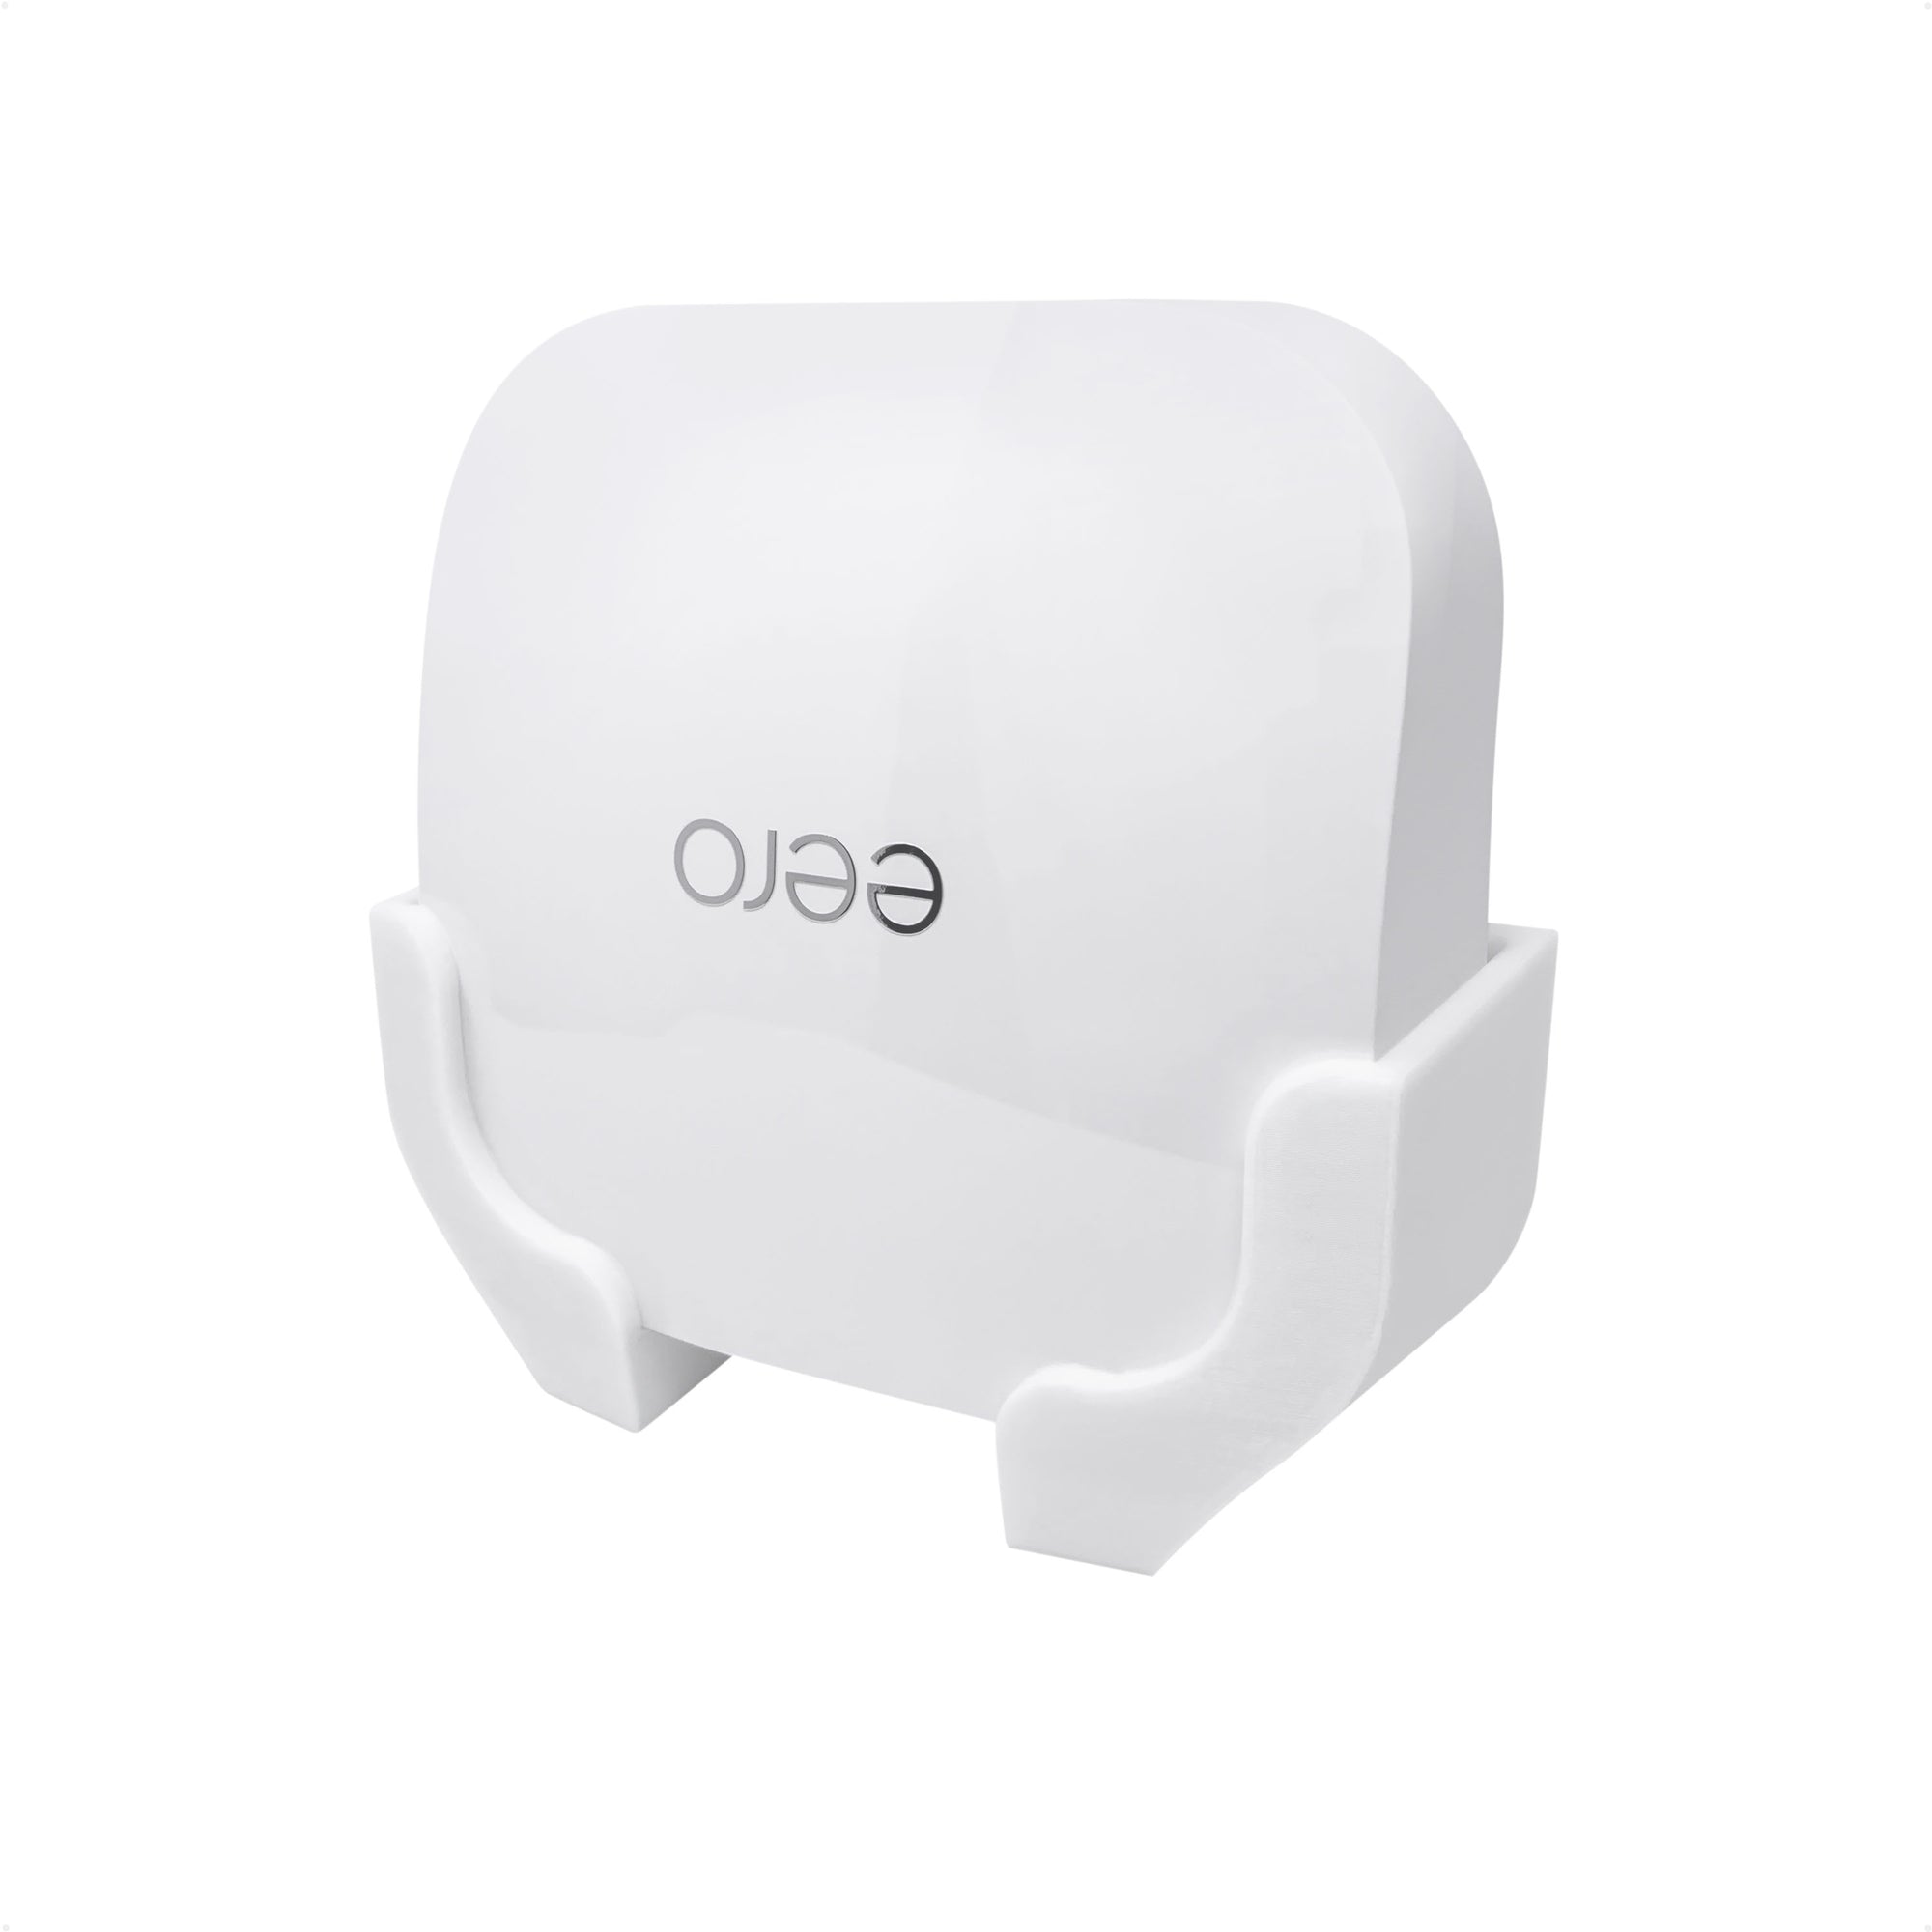 Wall Mount Compatible with EERO Pro 6 & EERO Pro 6E Mesh WiFi Router, Reduce Interference & Clutter